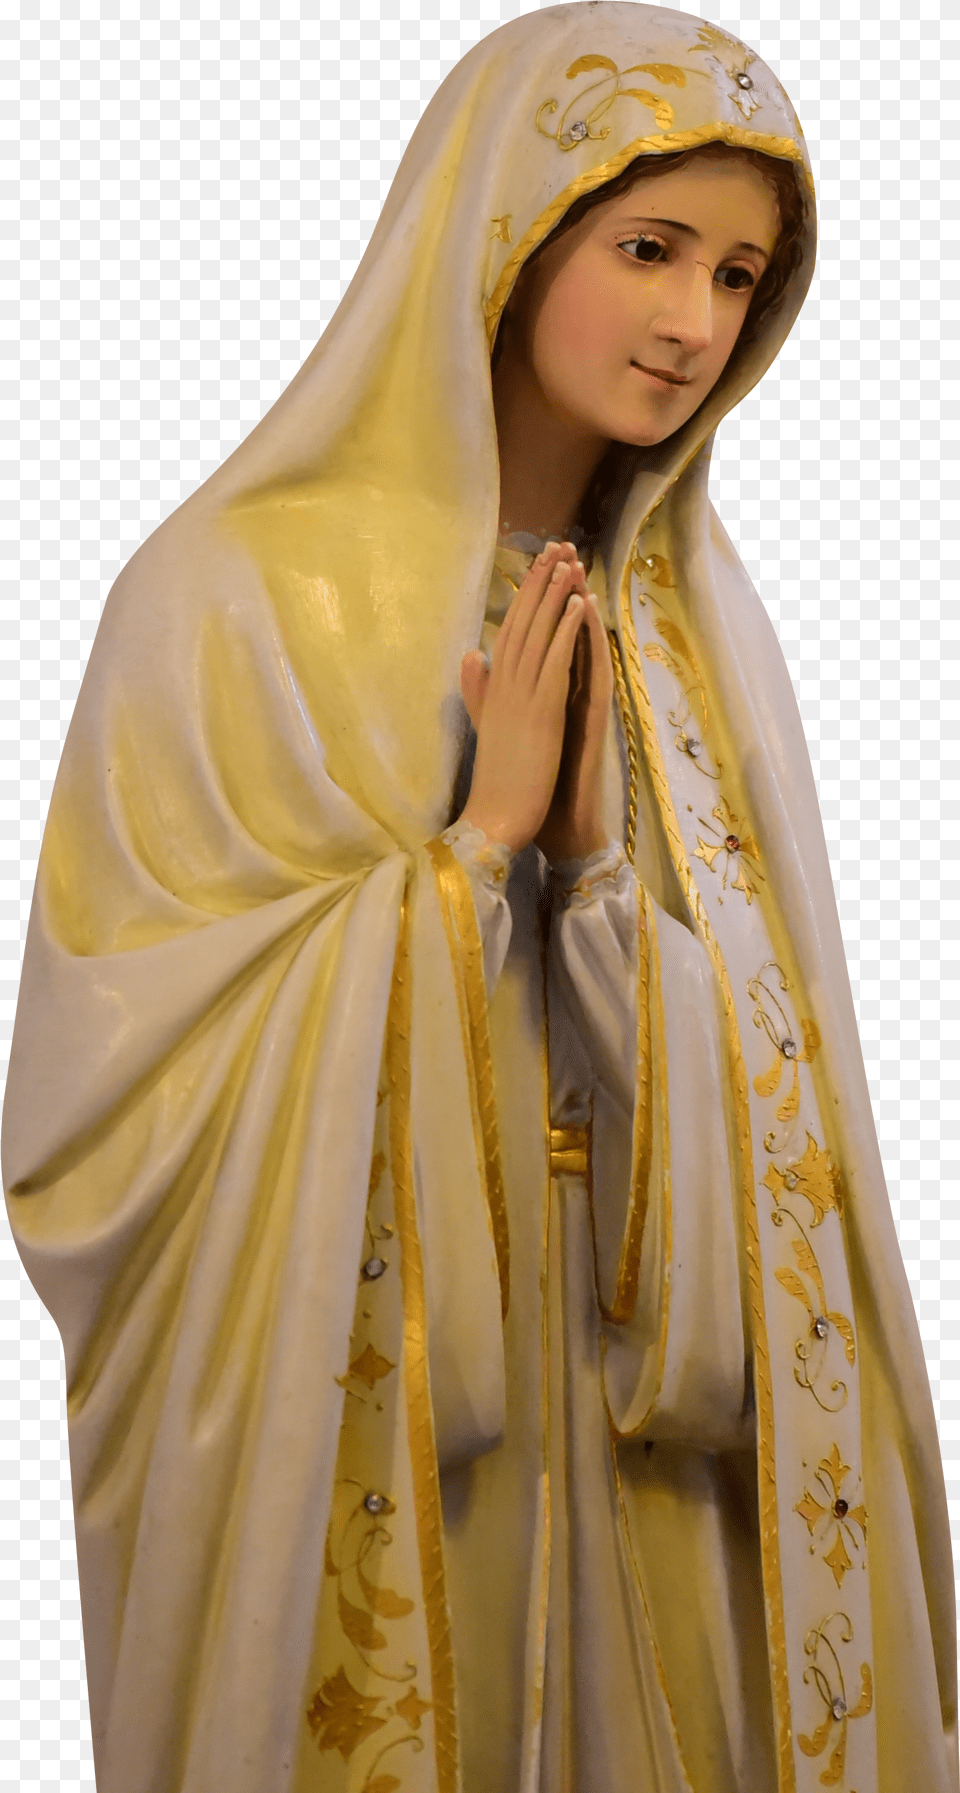 Virgin Mary Statue Virgin Mary Statue Free Png Download